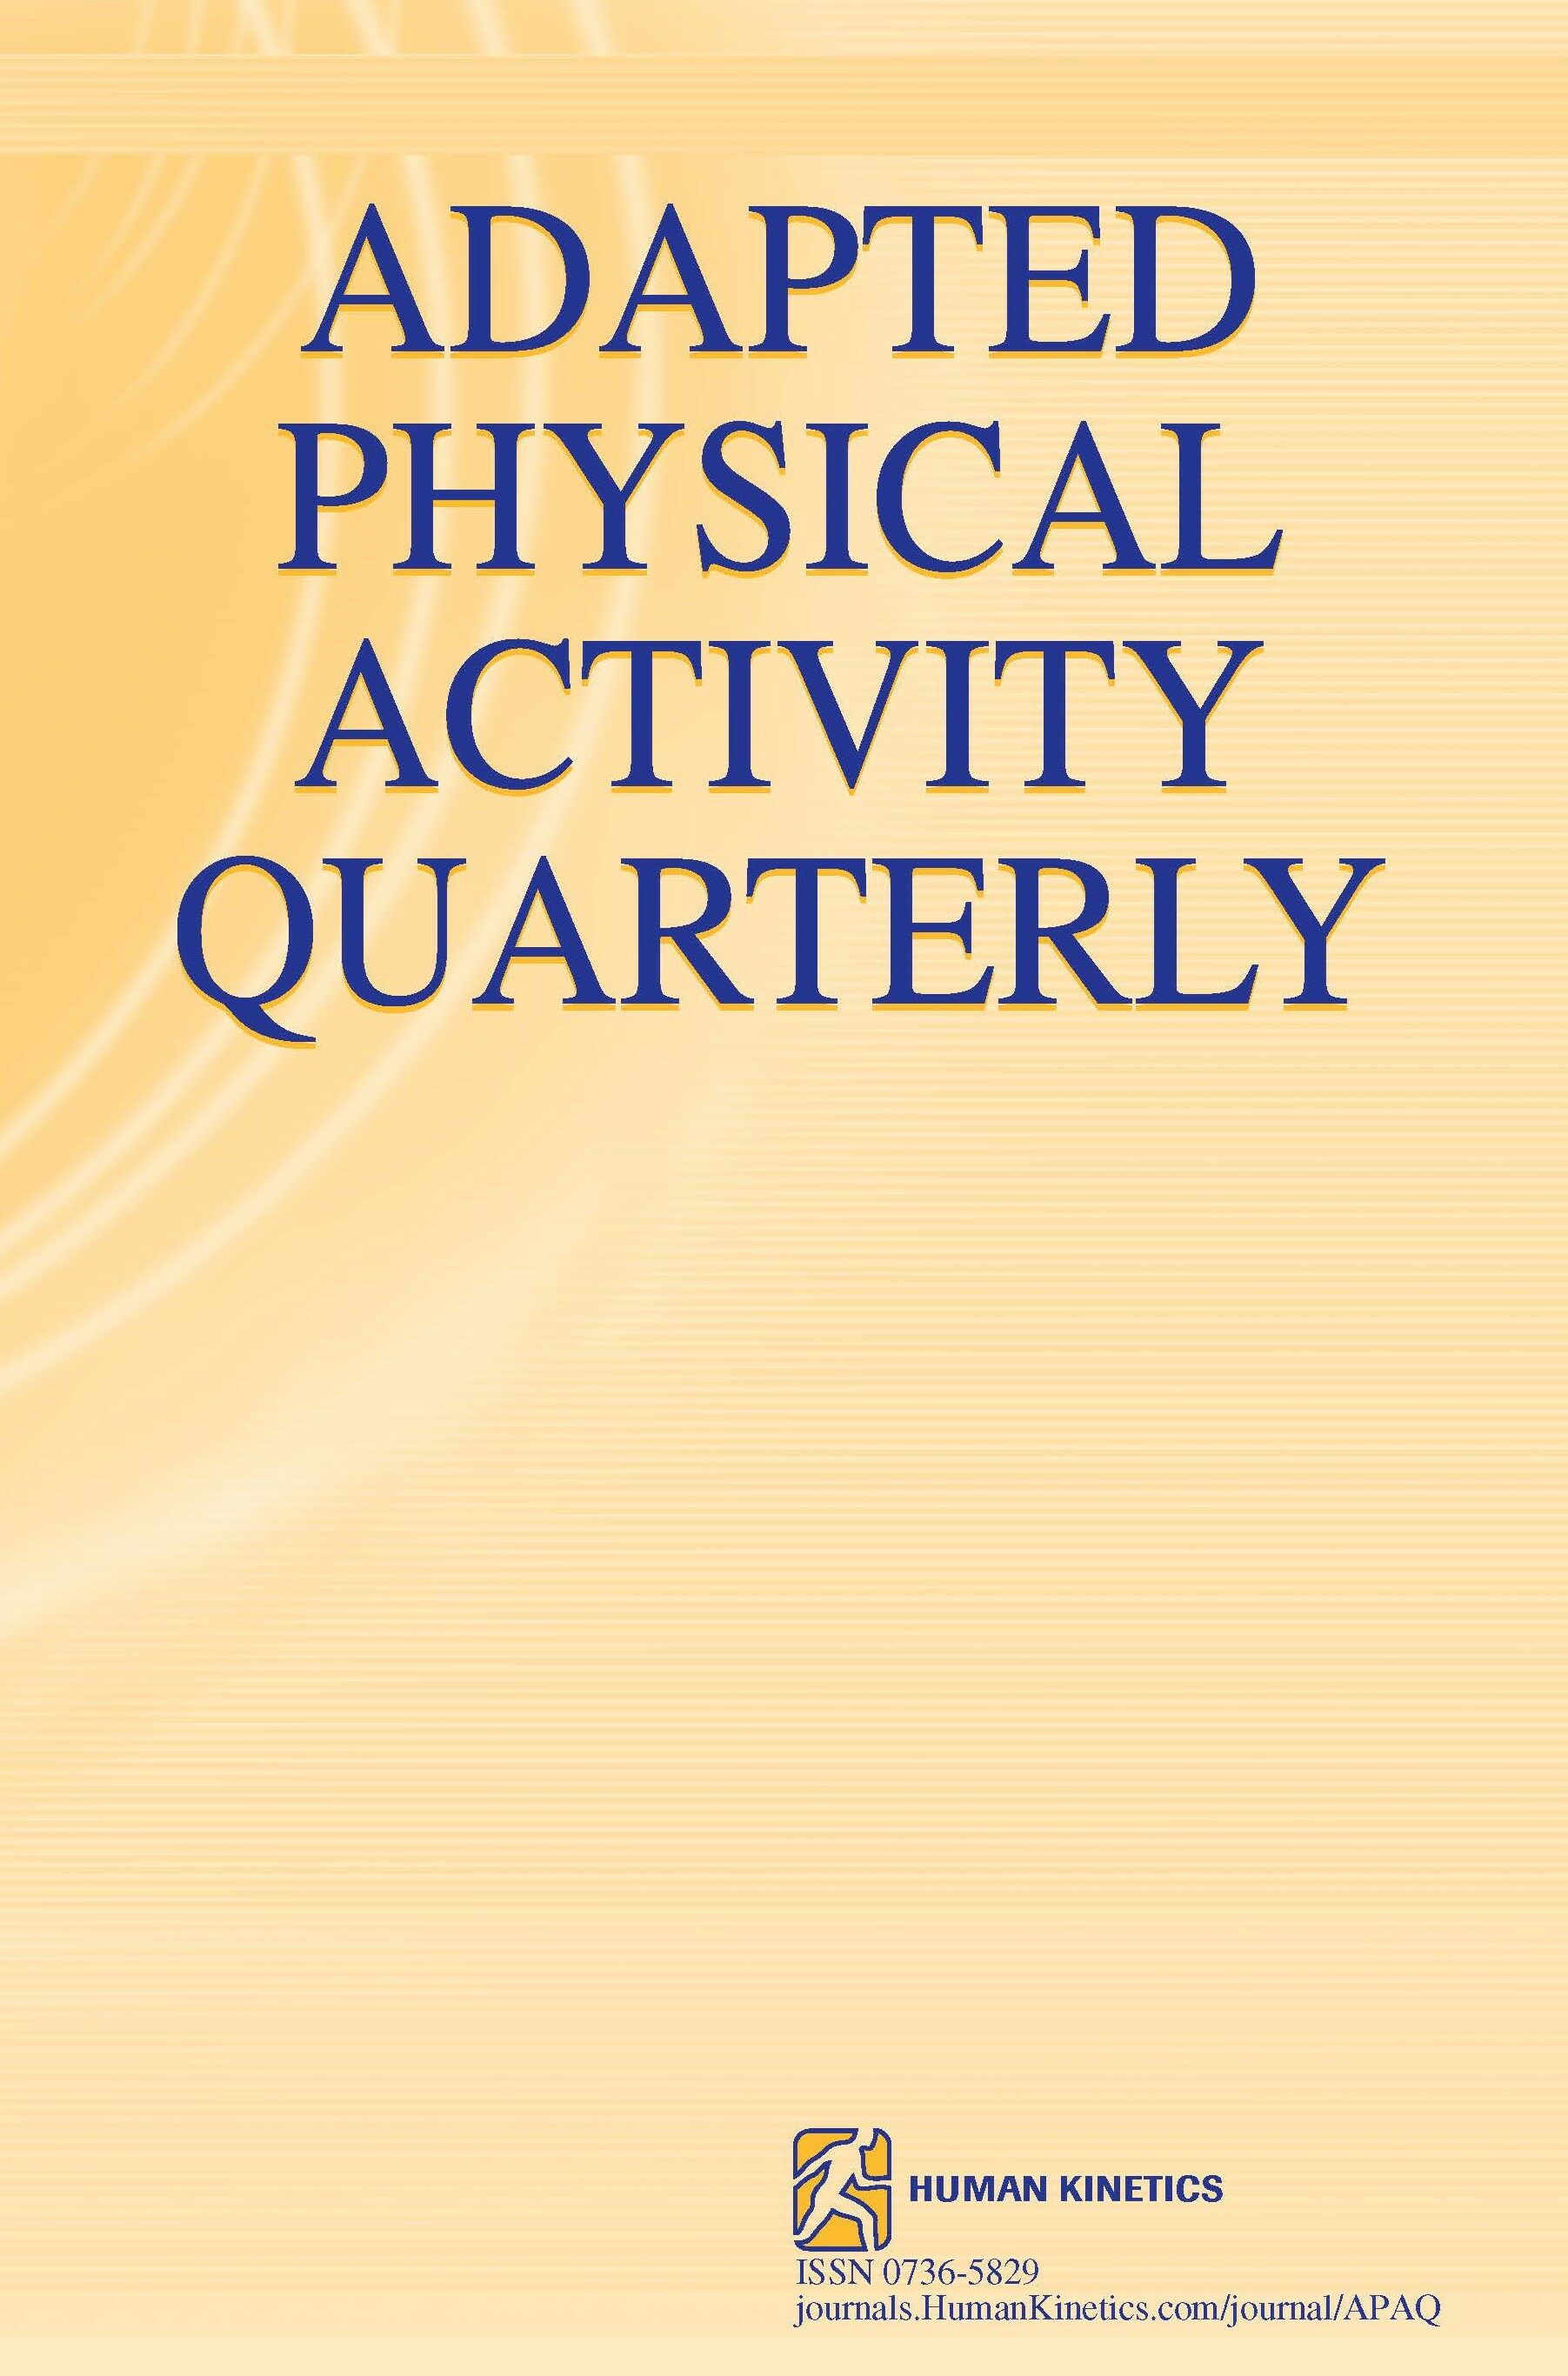 Changes in Physical Activity Associated With a Multicomponent Weight-Loss Randomized Controlled Trial for Youth With Intellectual Disabilities